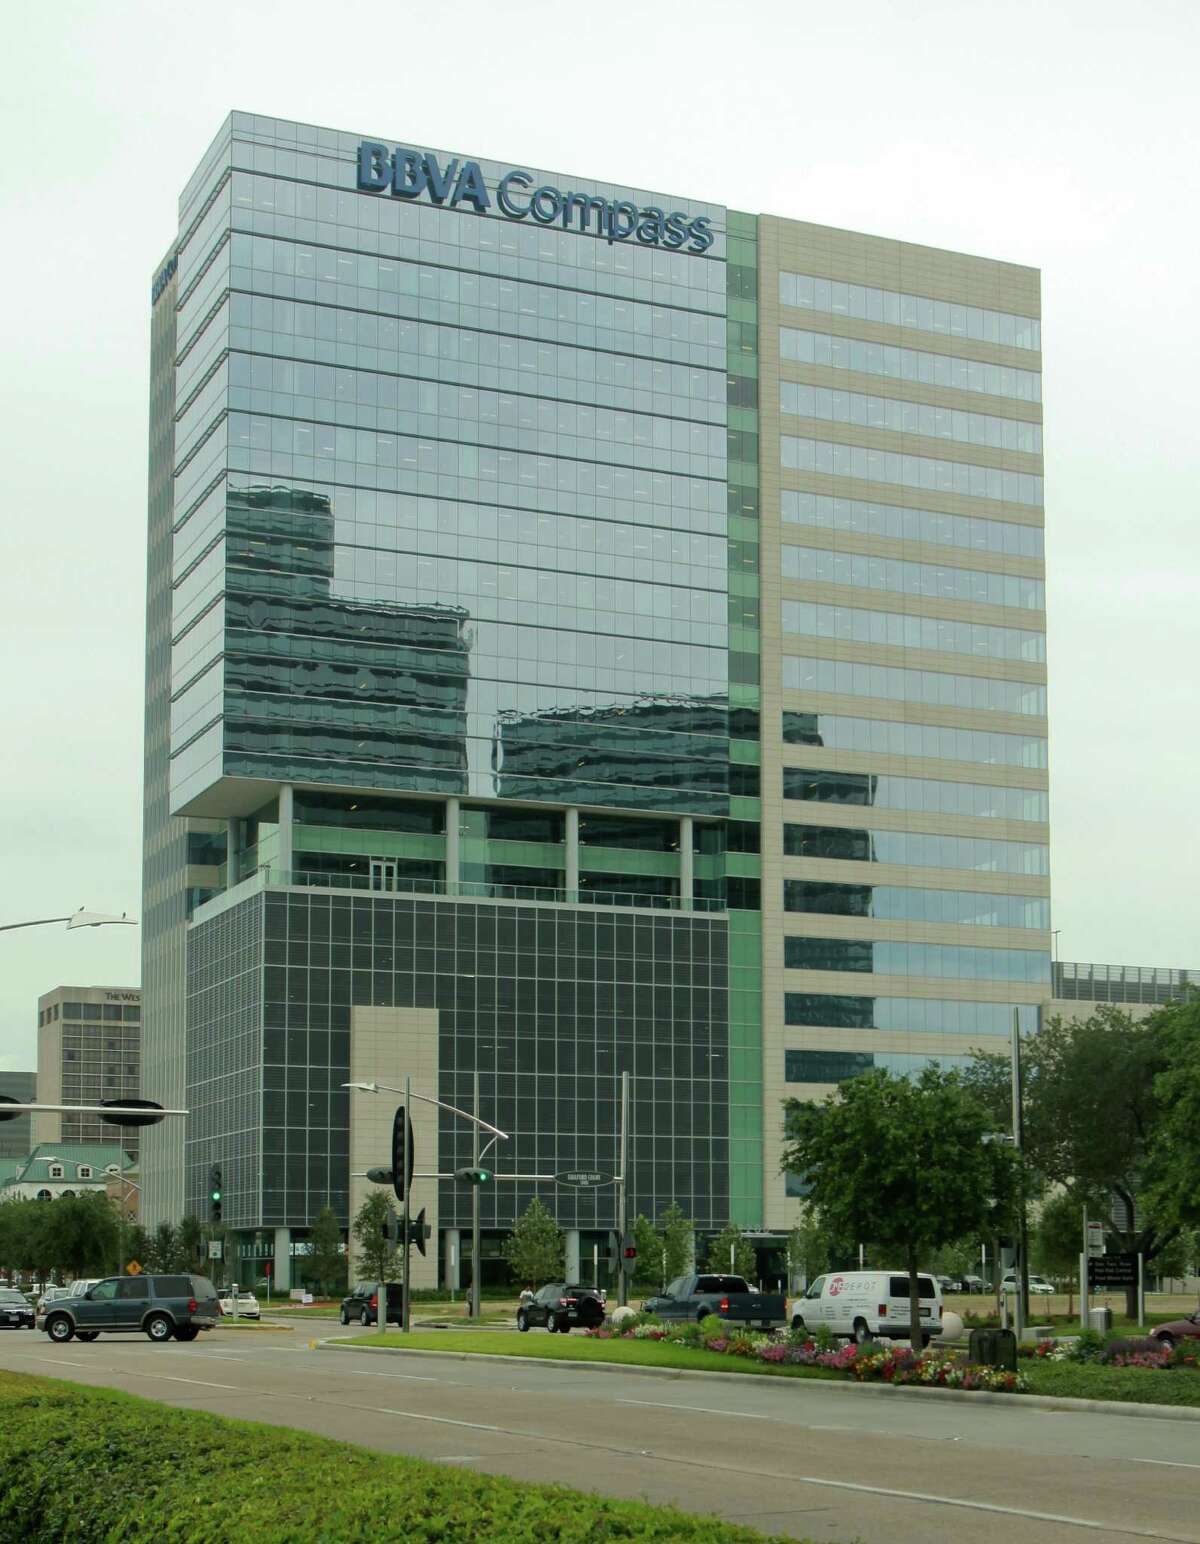 (For the Chronicle/Gary Fountain, June 12, 2013) BBVA Compass' new office building in the Galleria area.